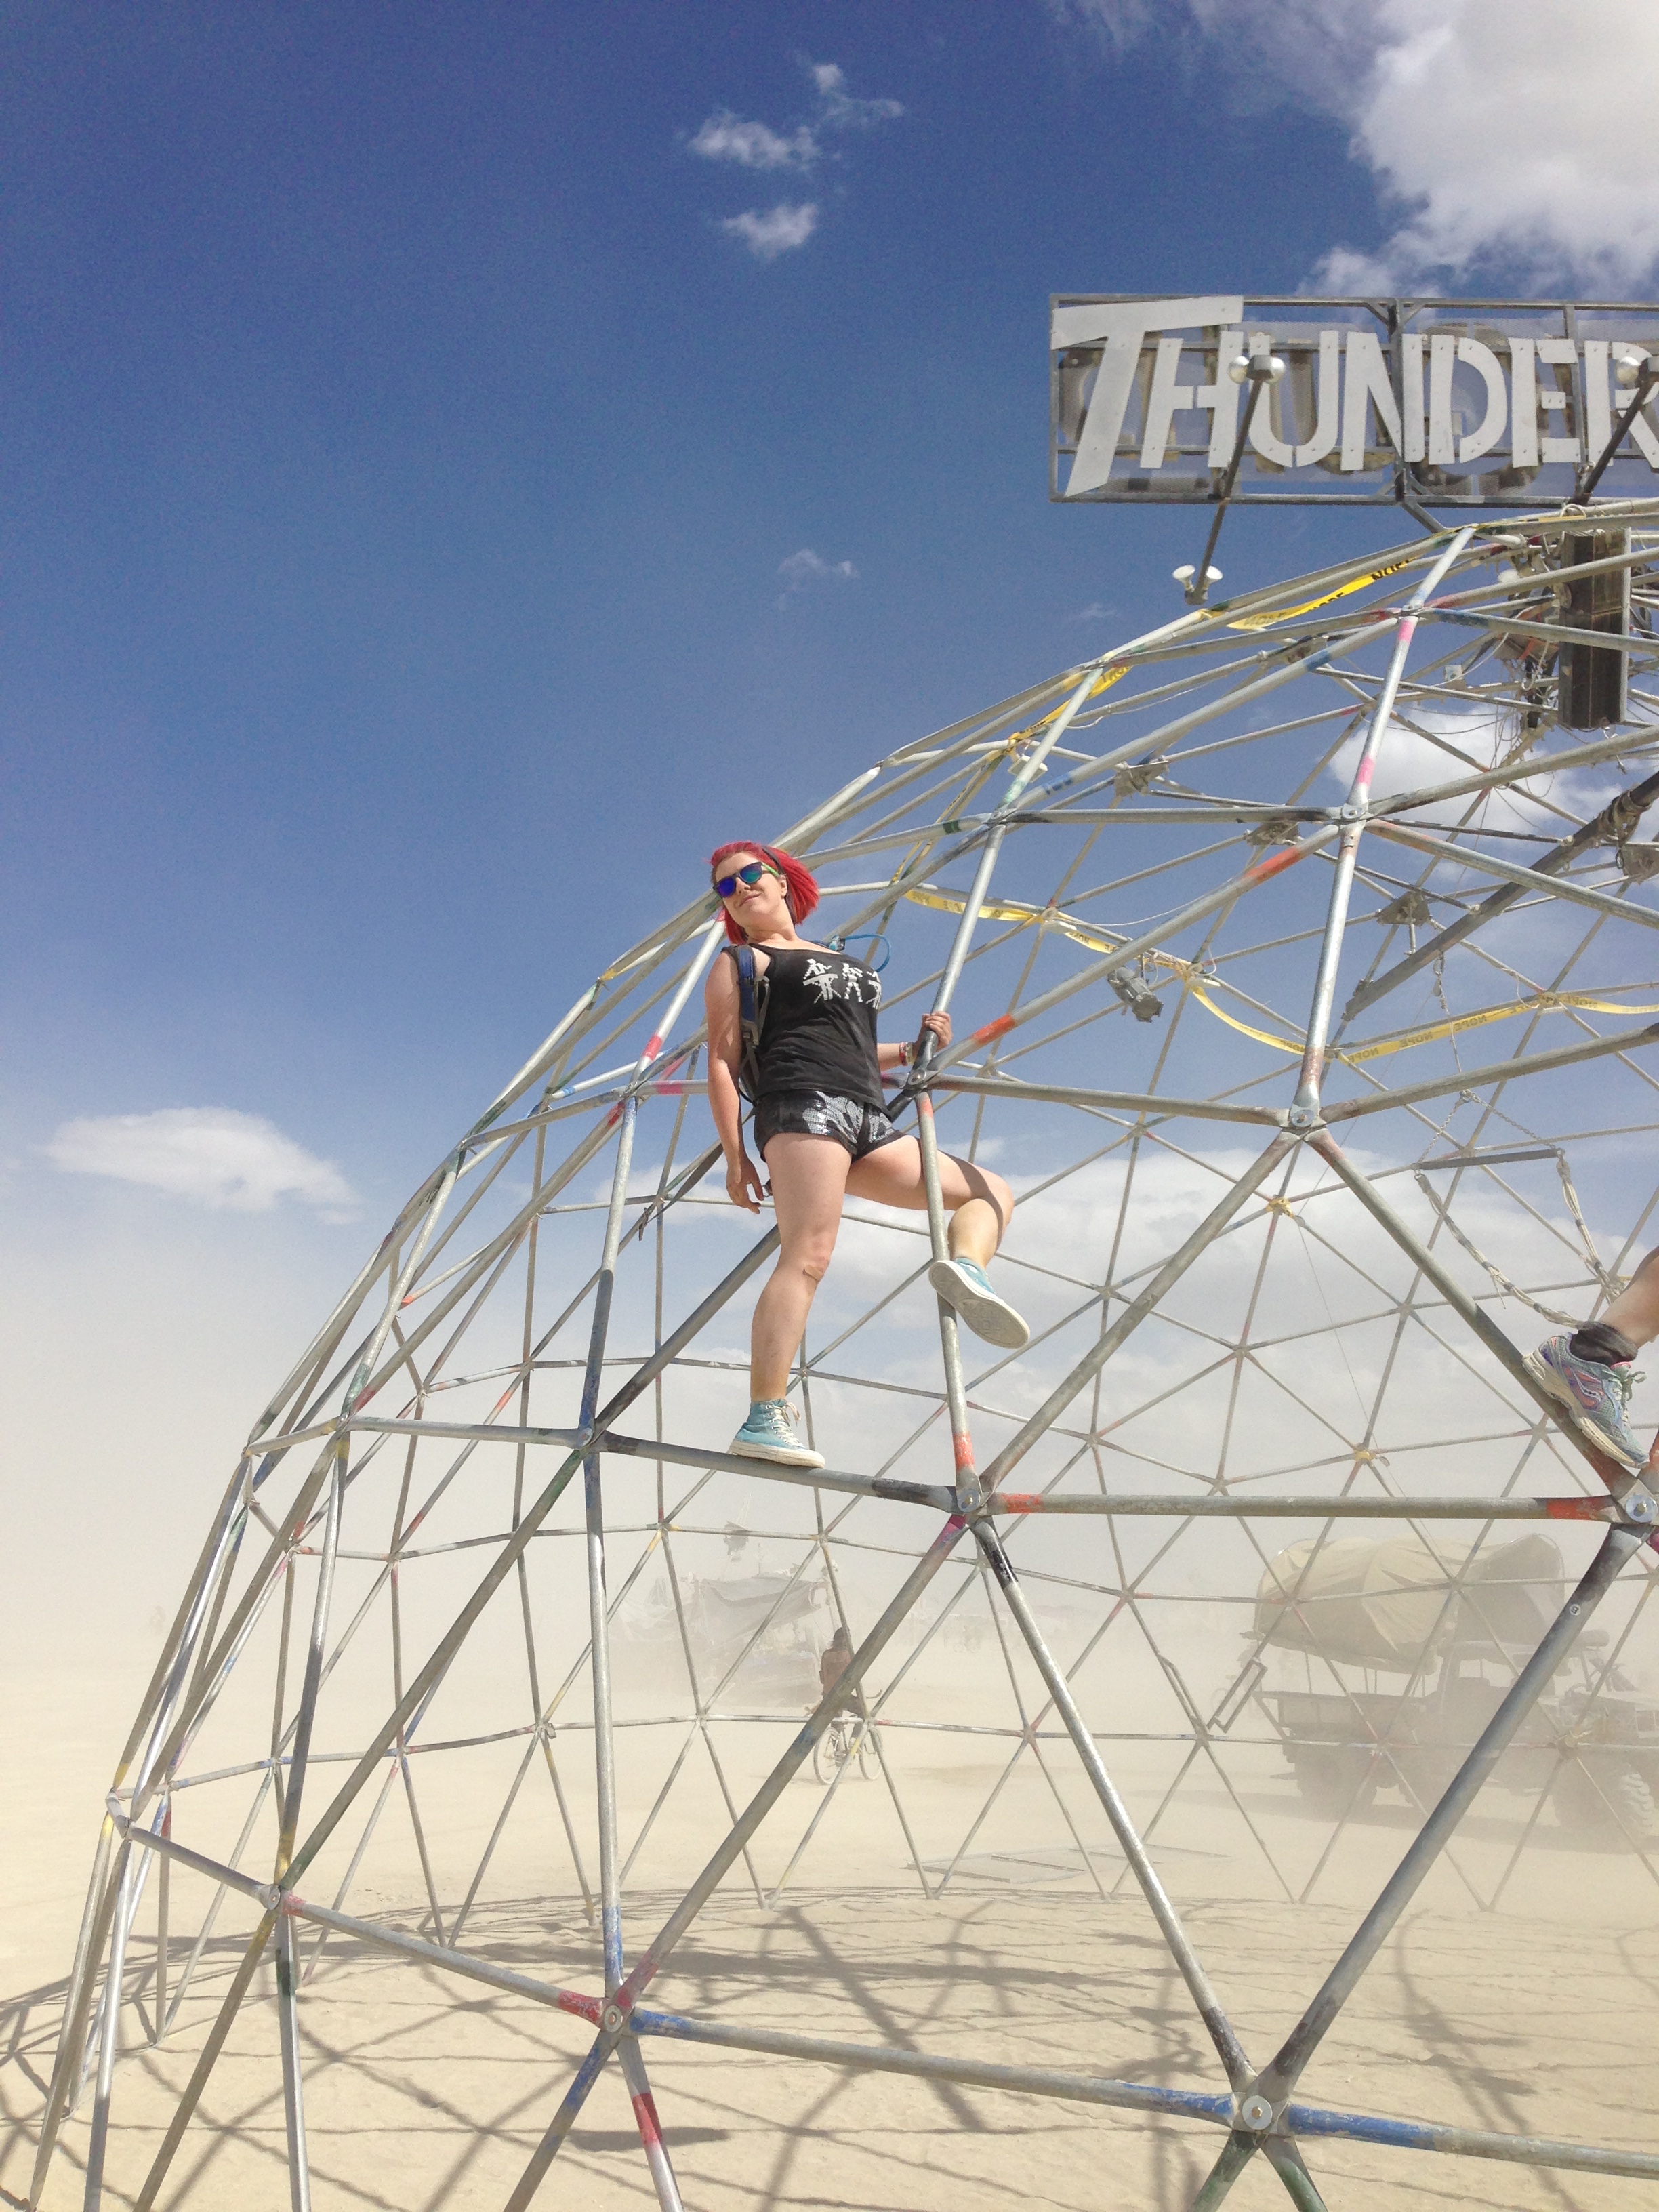 Having conquered the Thunderdome, S strikes a triumphant pose.